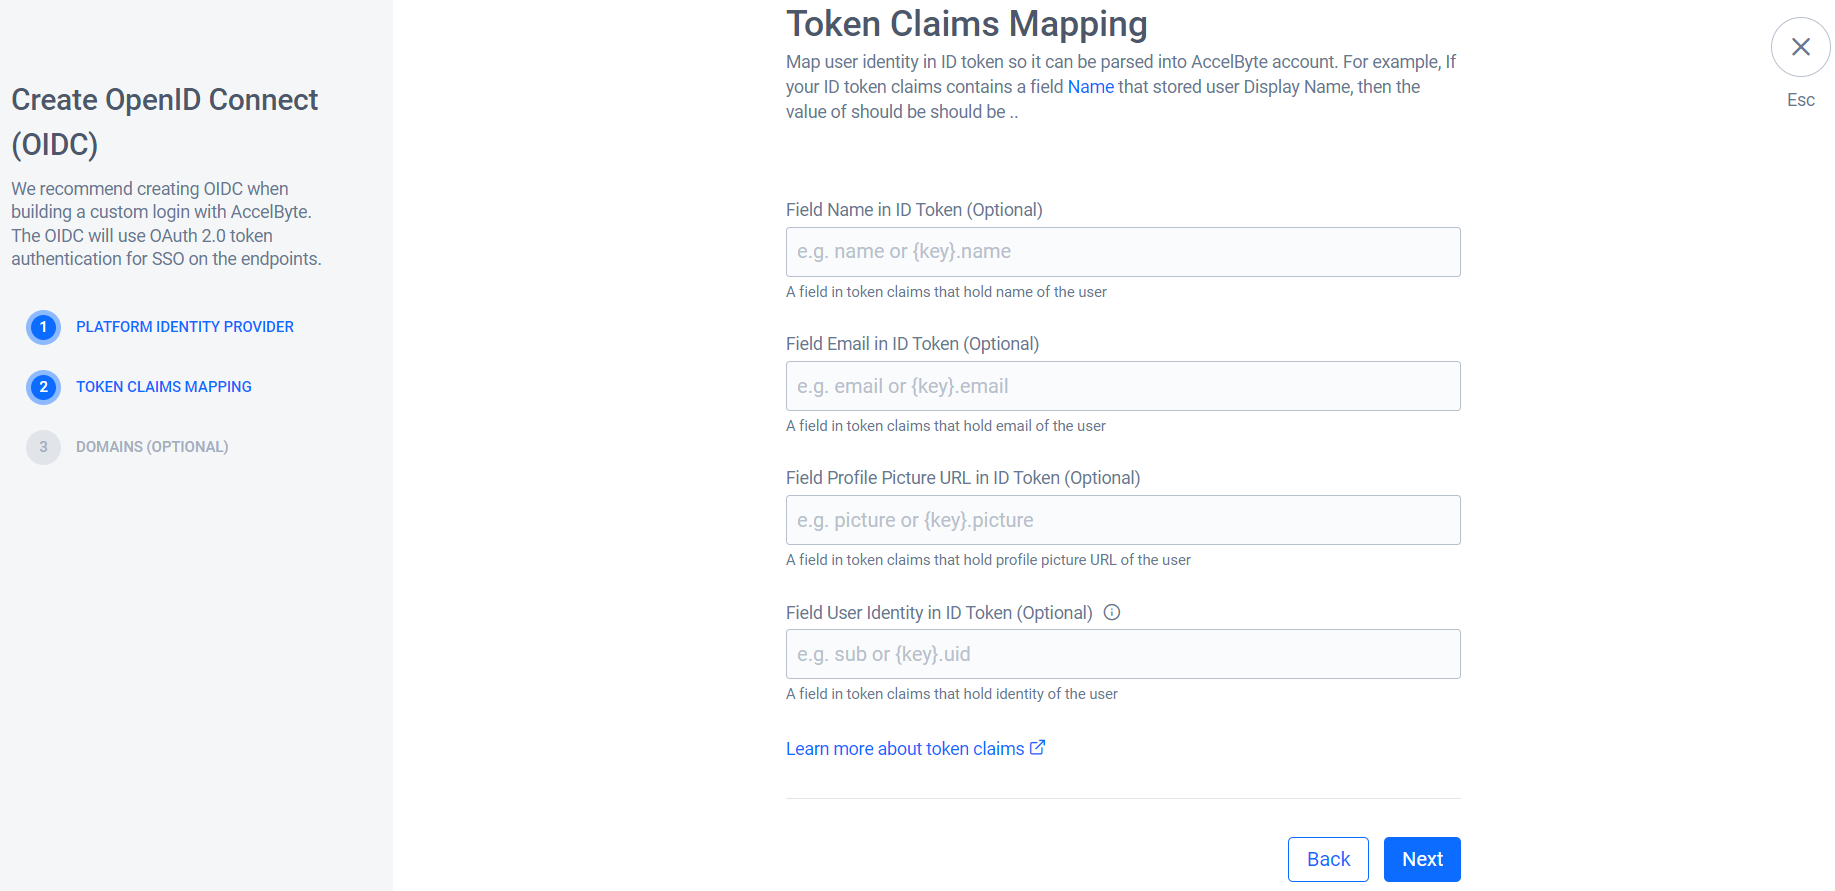 Image hows the Token Claims Mapping form